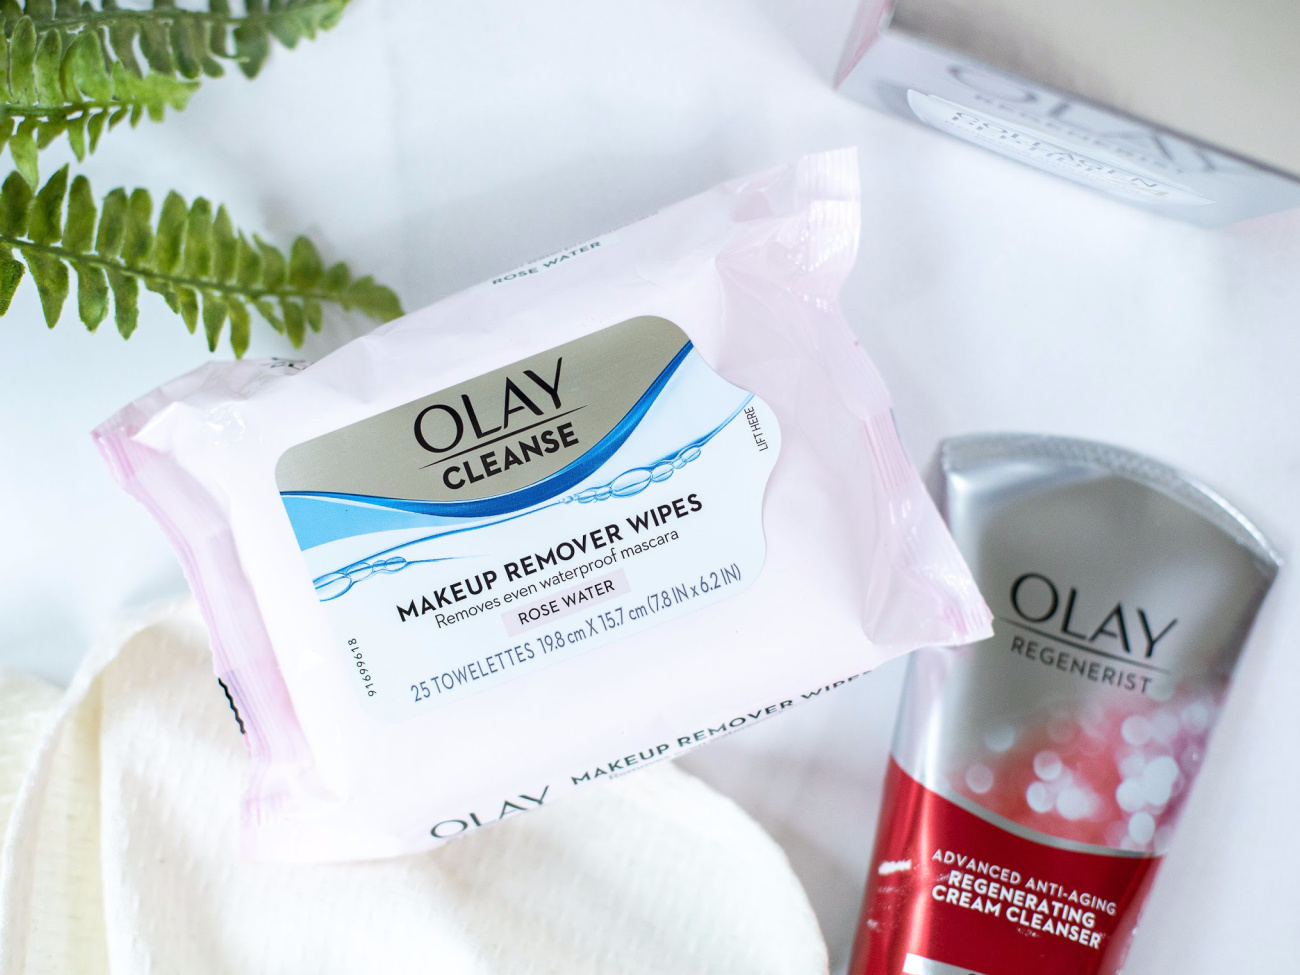 Olay Cleansing Wipes As Low As $3.99 At Publix